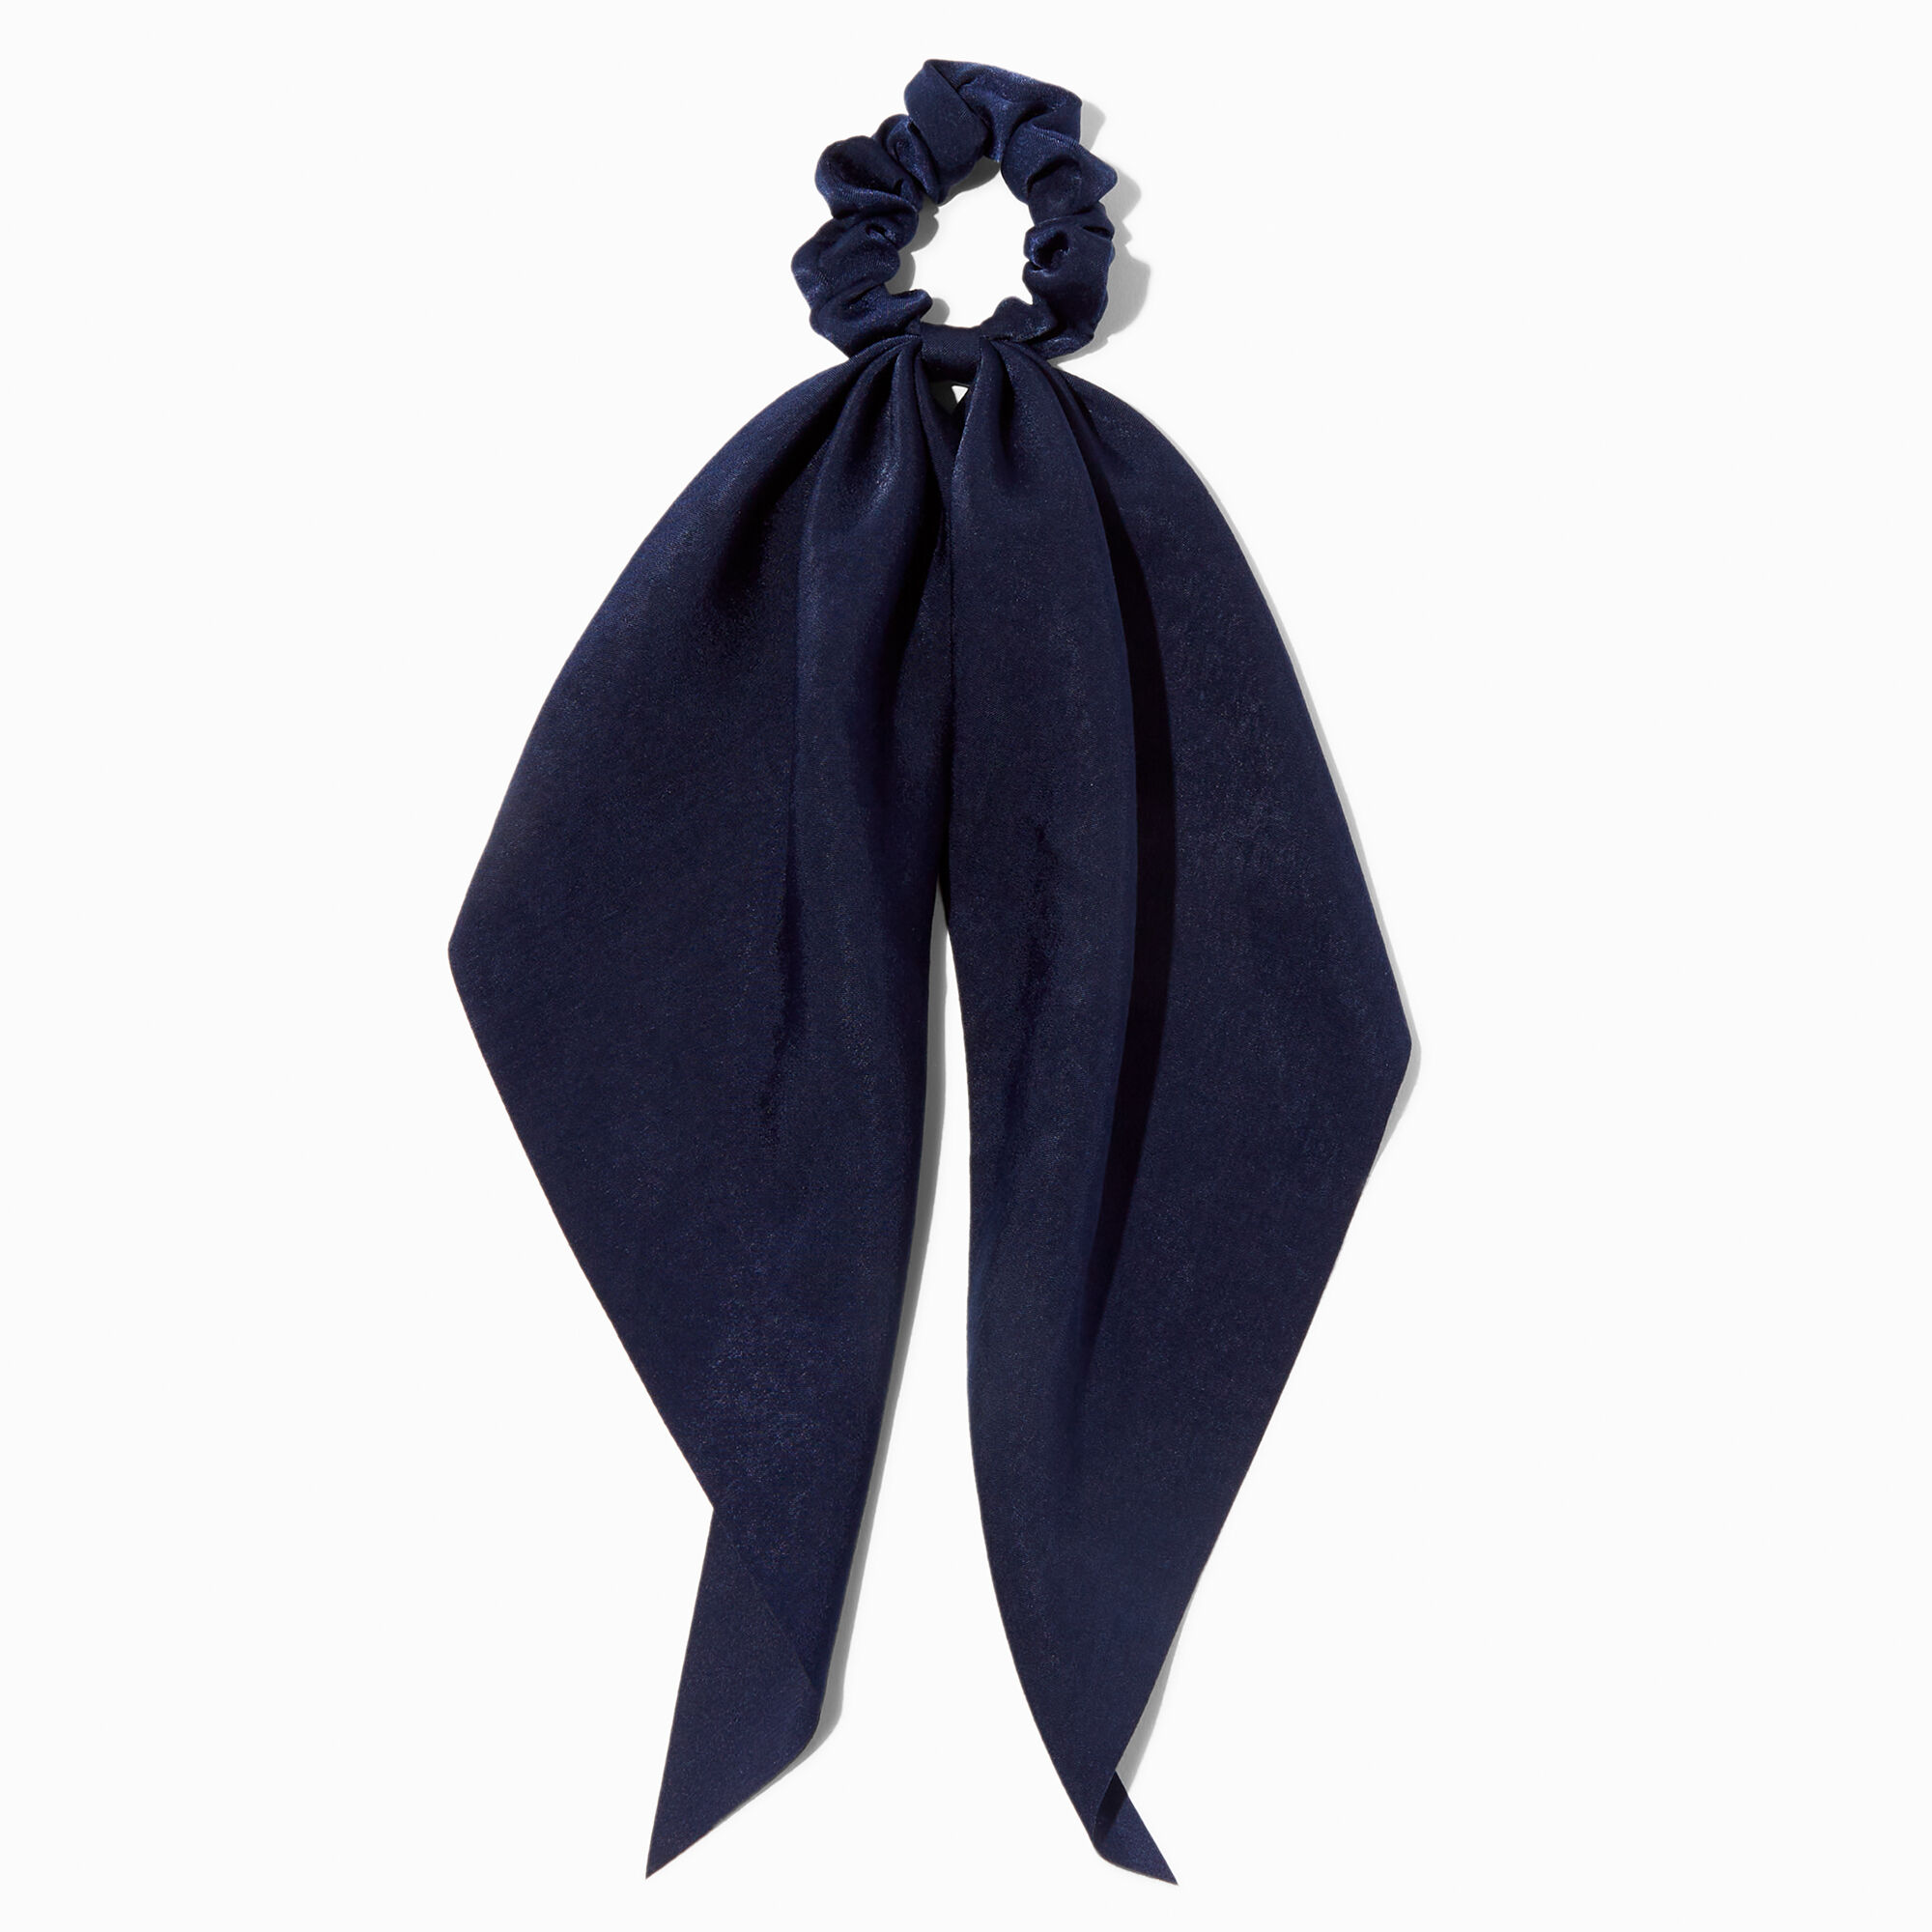 View Claires Small Hair Scrunchie Scarf Navy information